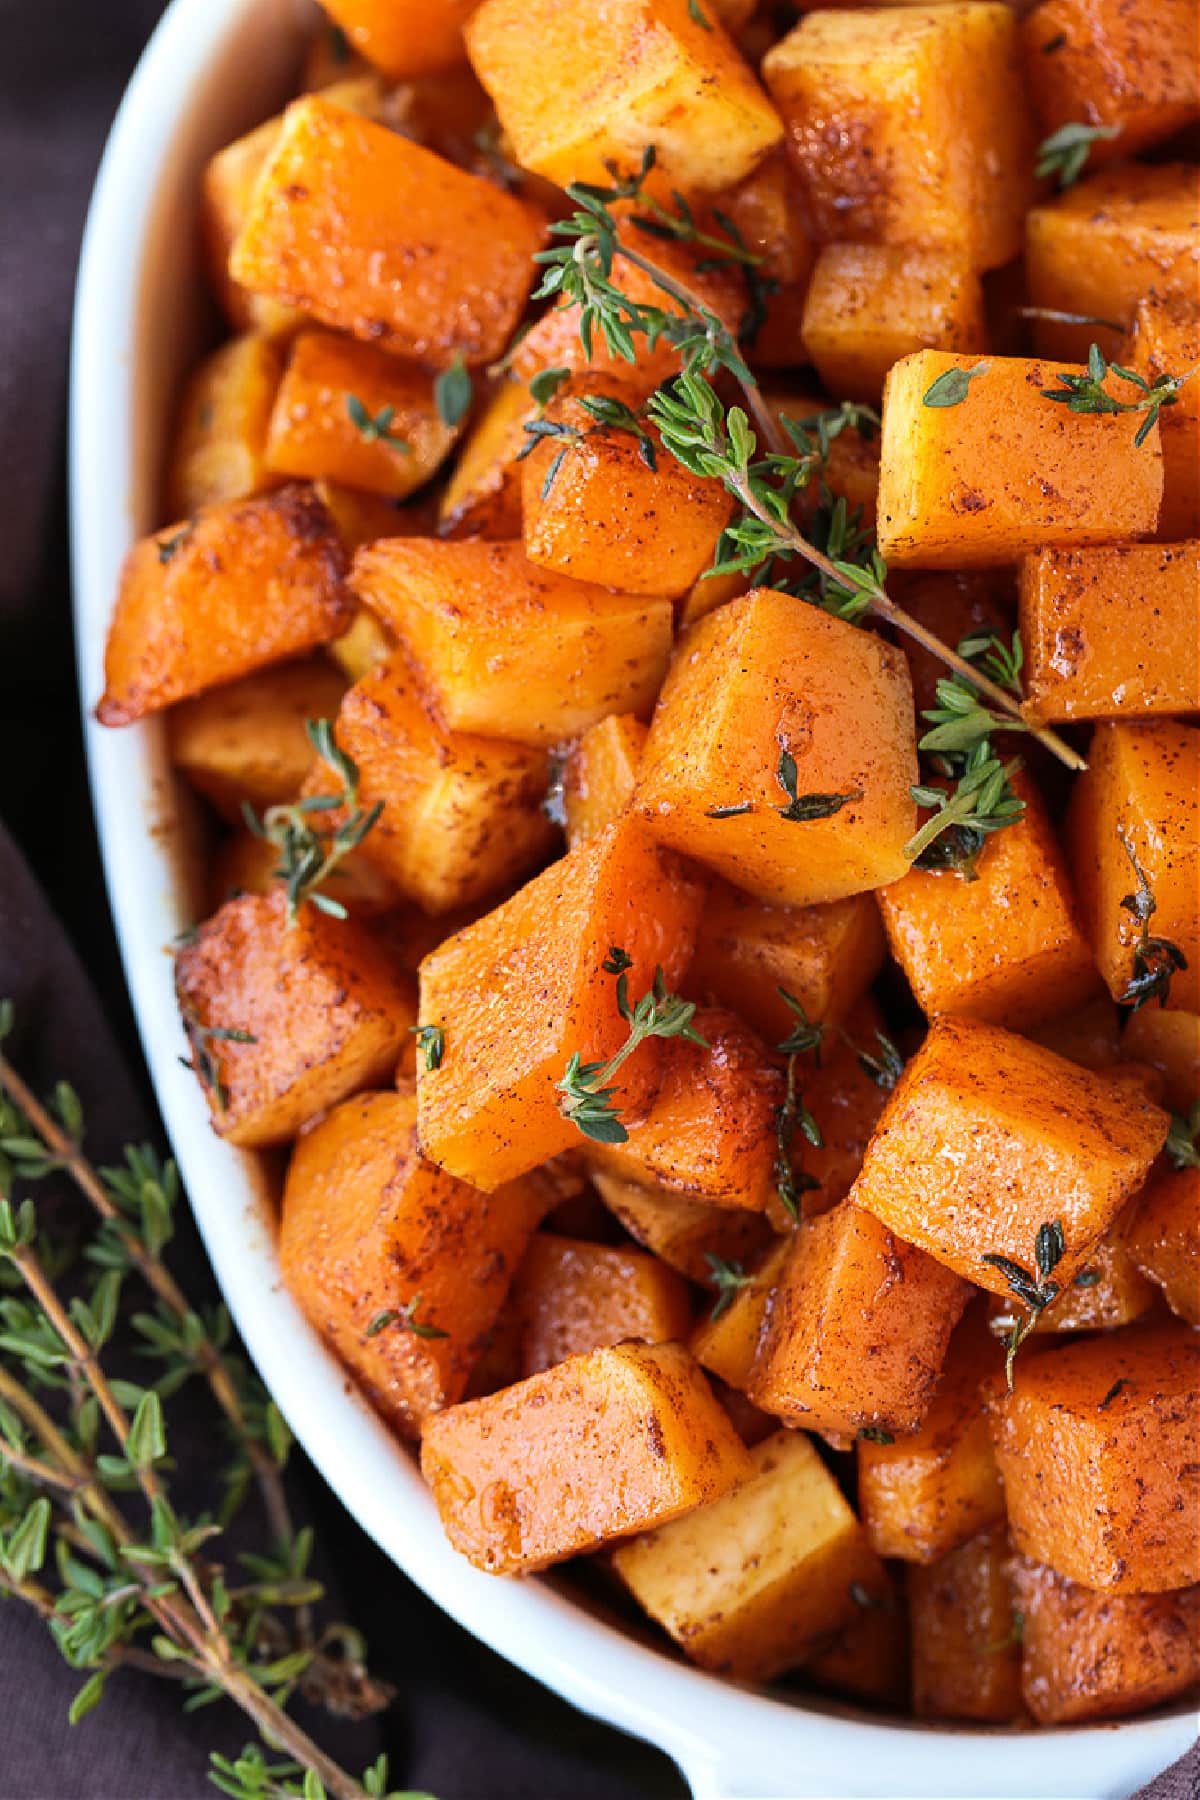 cubes of roasted butternut squash in white dish from top